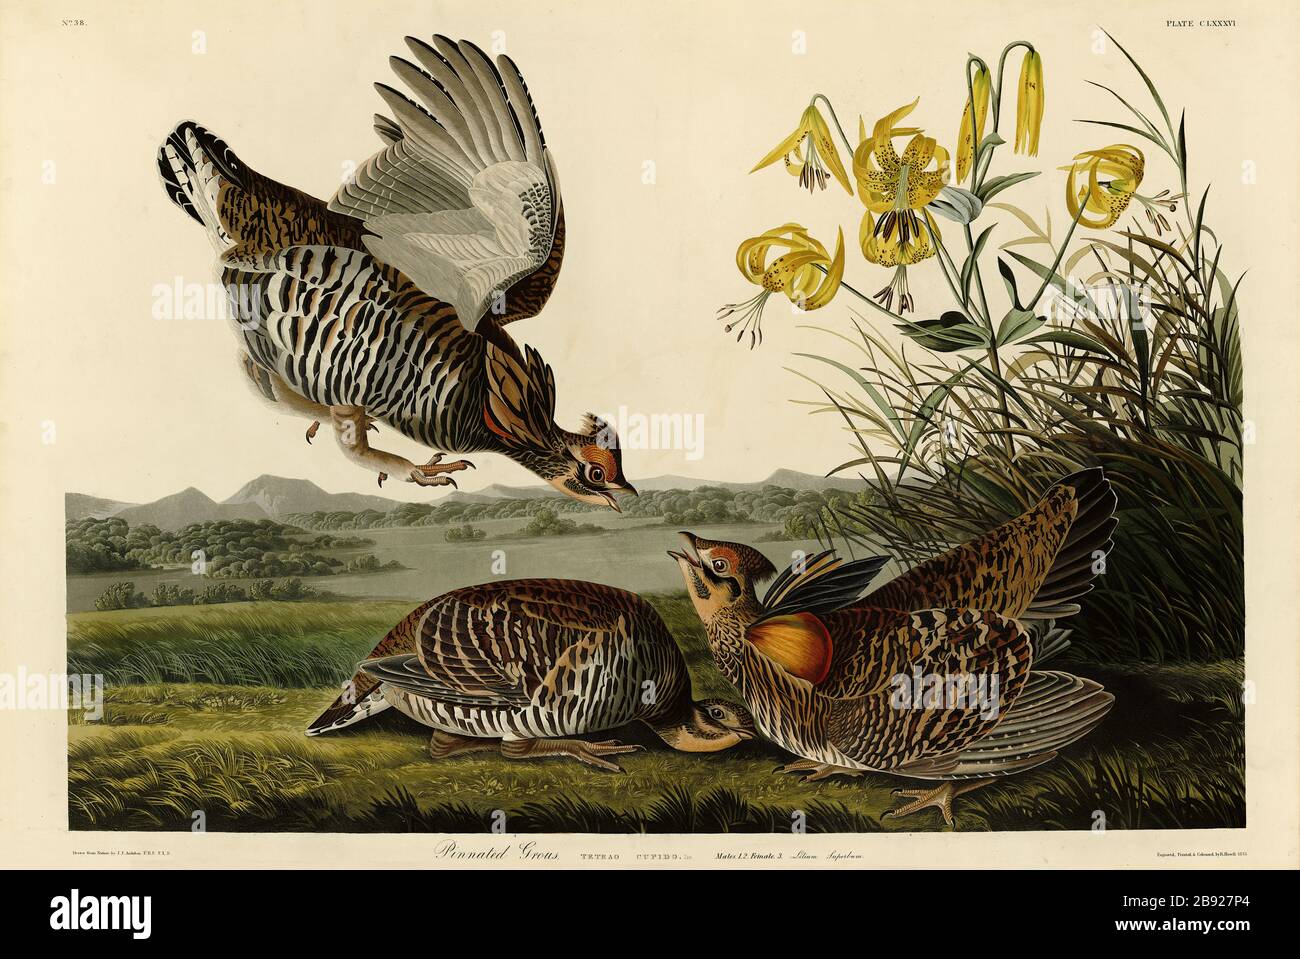 Plate 186 Pinnated Grous (Grouse) from The Birds of America folio (1827–1839) by John James Audubon - Very high resolution and quality edited image Stock Photo